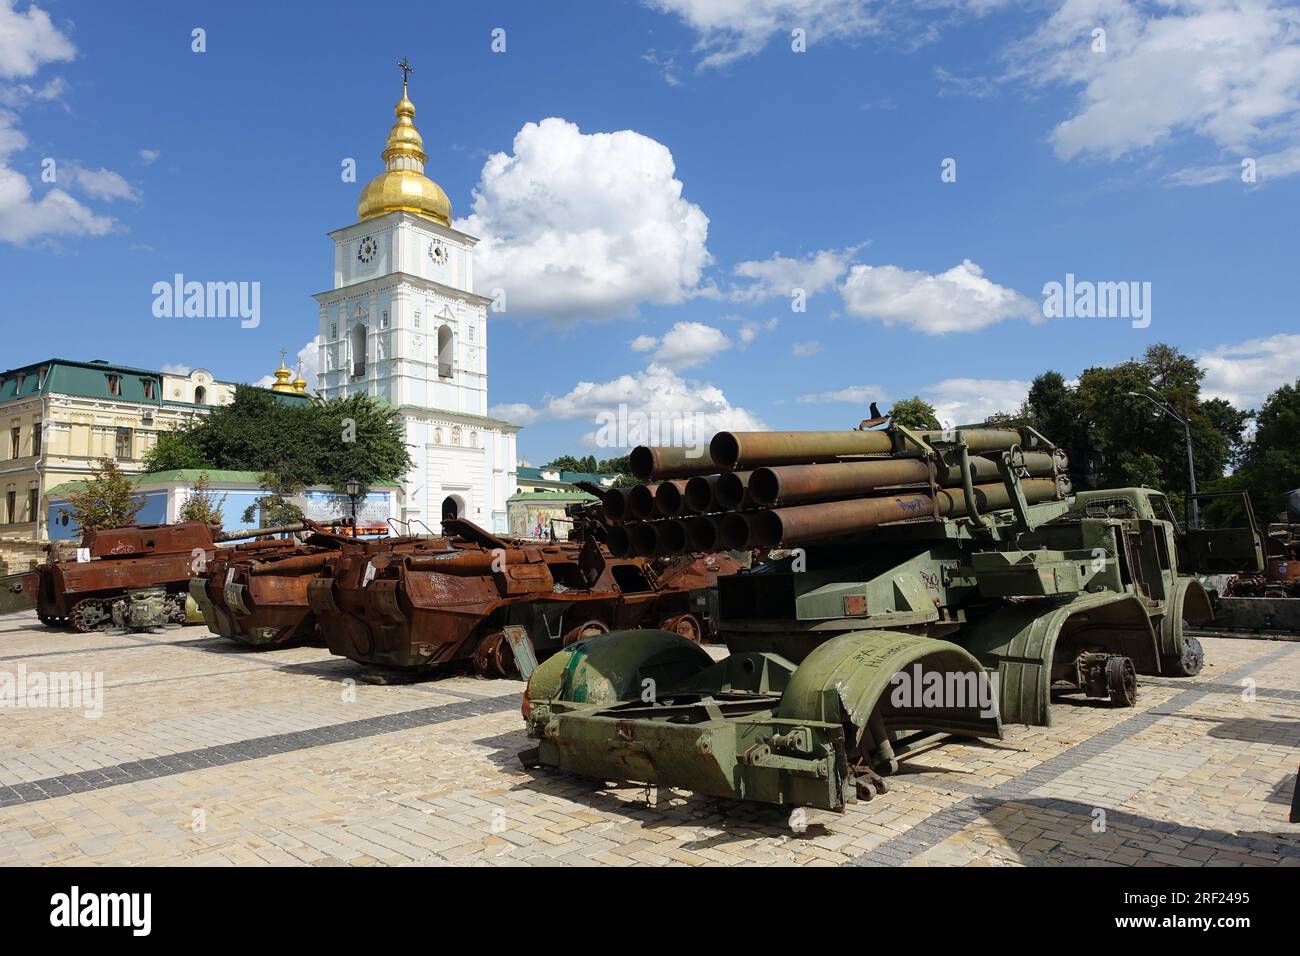 Destroyed Russian army armored vehicles are displayed in a square in central kyiv, Ukraine Stock Photo